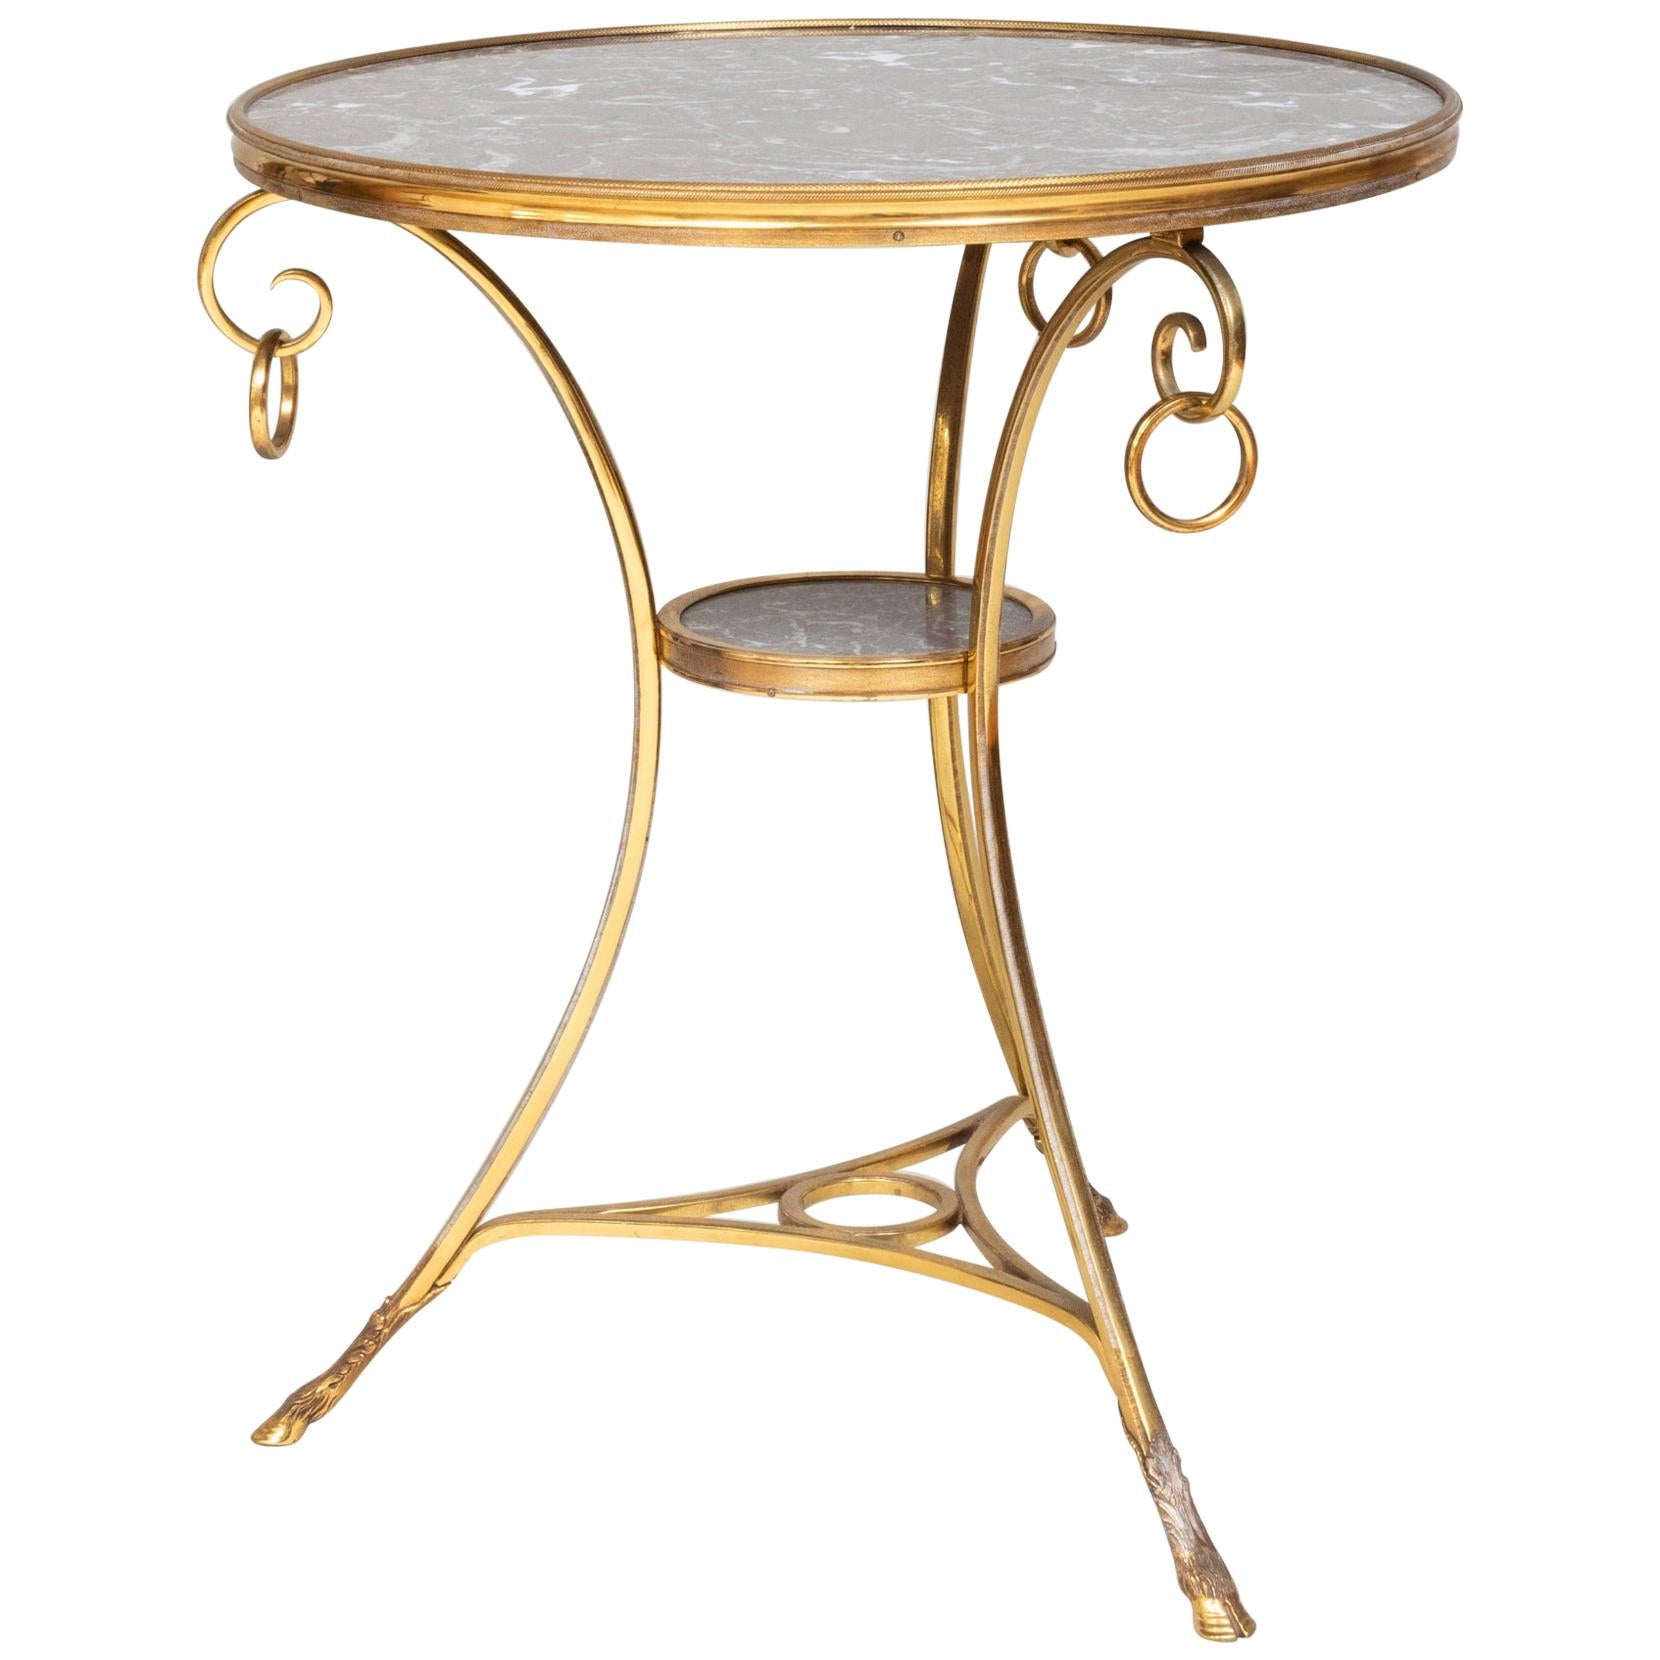 Louis XVI Style Gilt Bronze and Marble Side Table